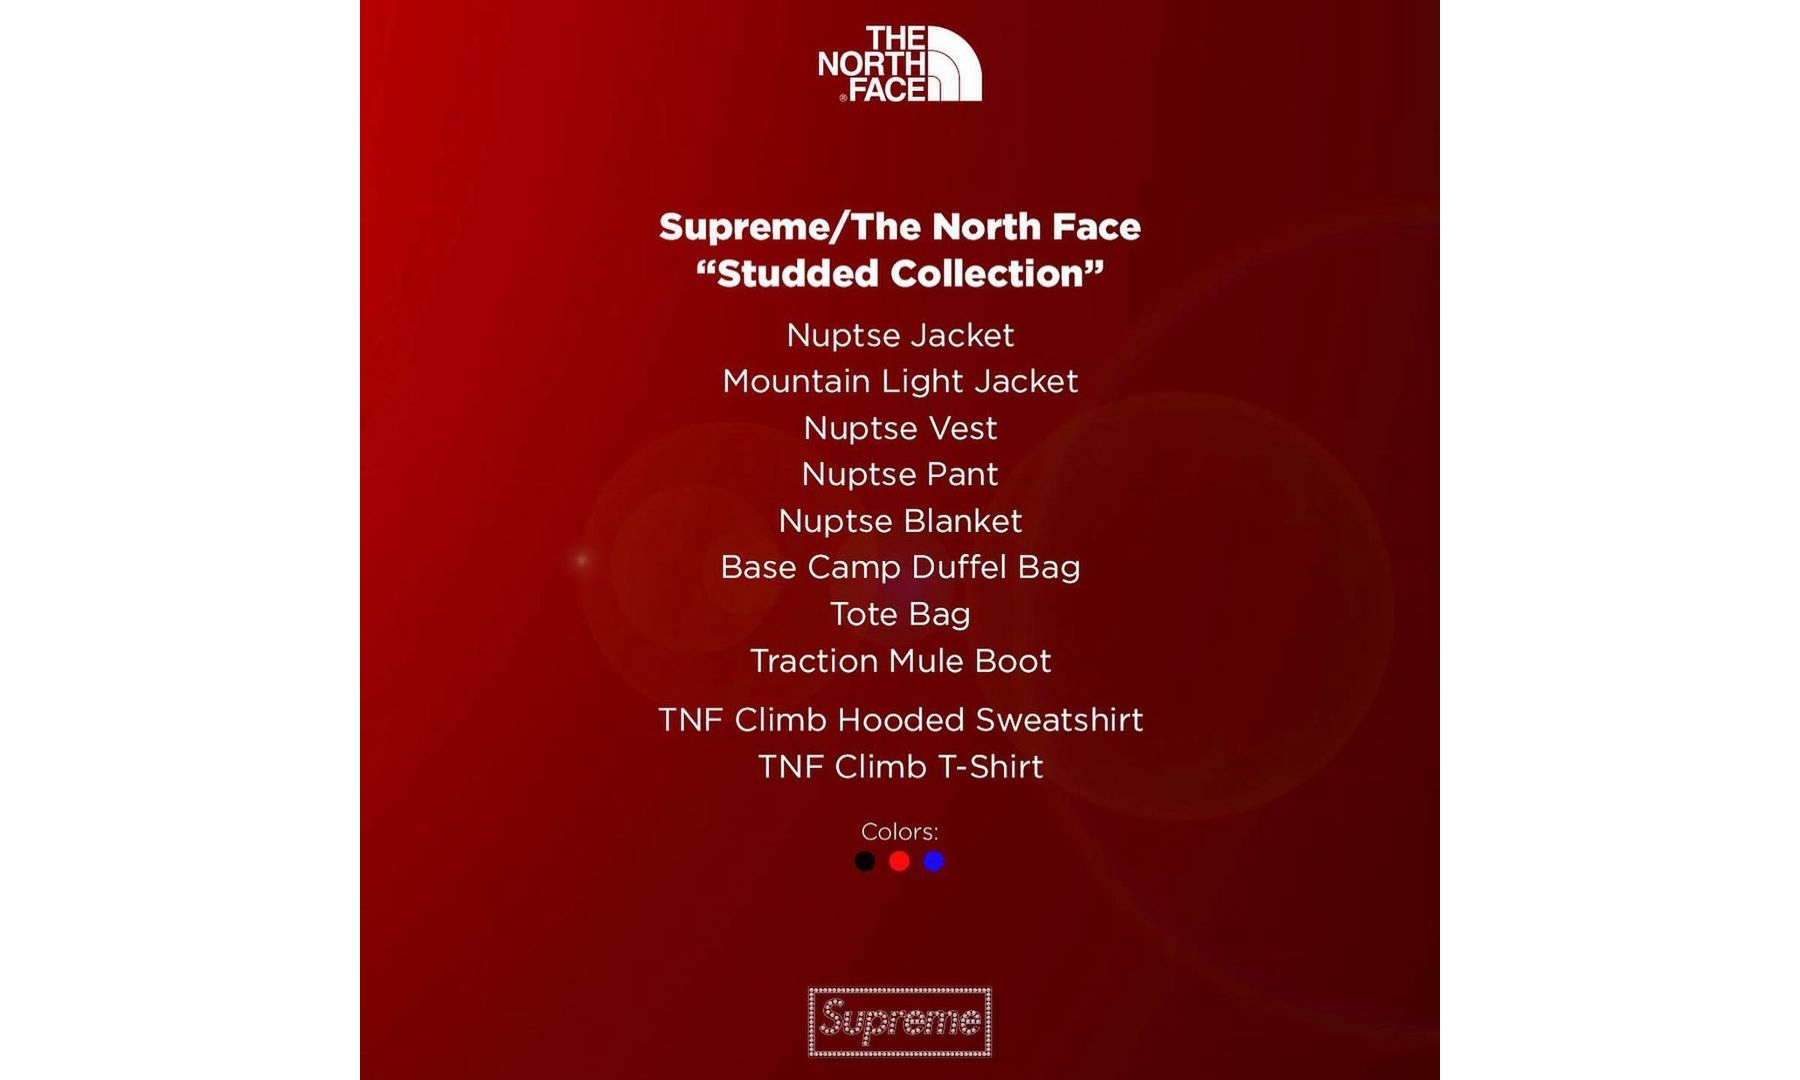 Supreme x THE NORTH FACE 推出全新 Studded Collection